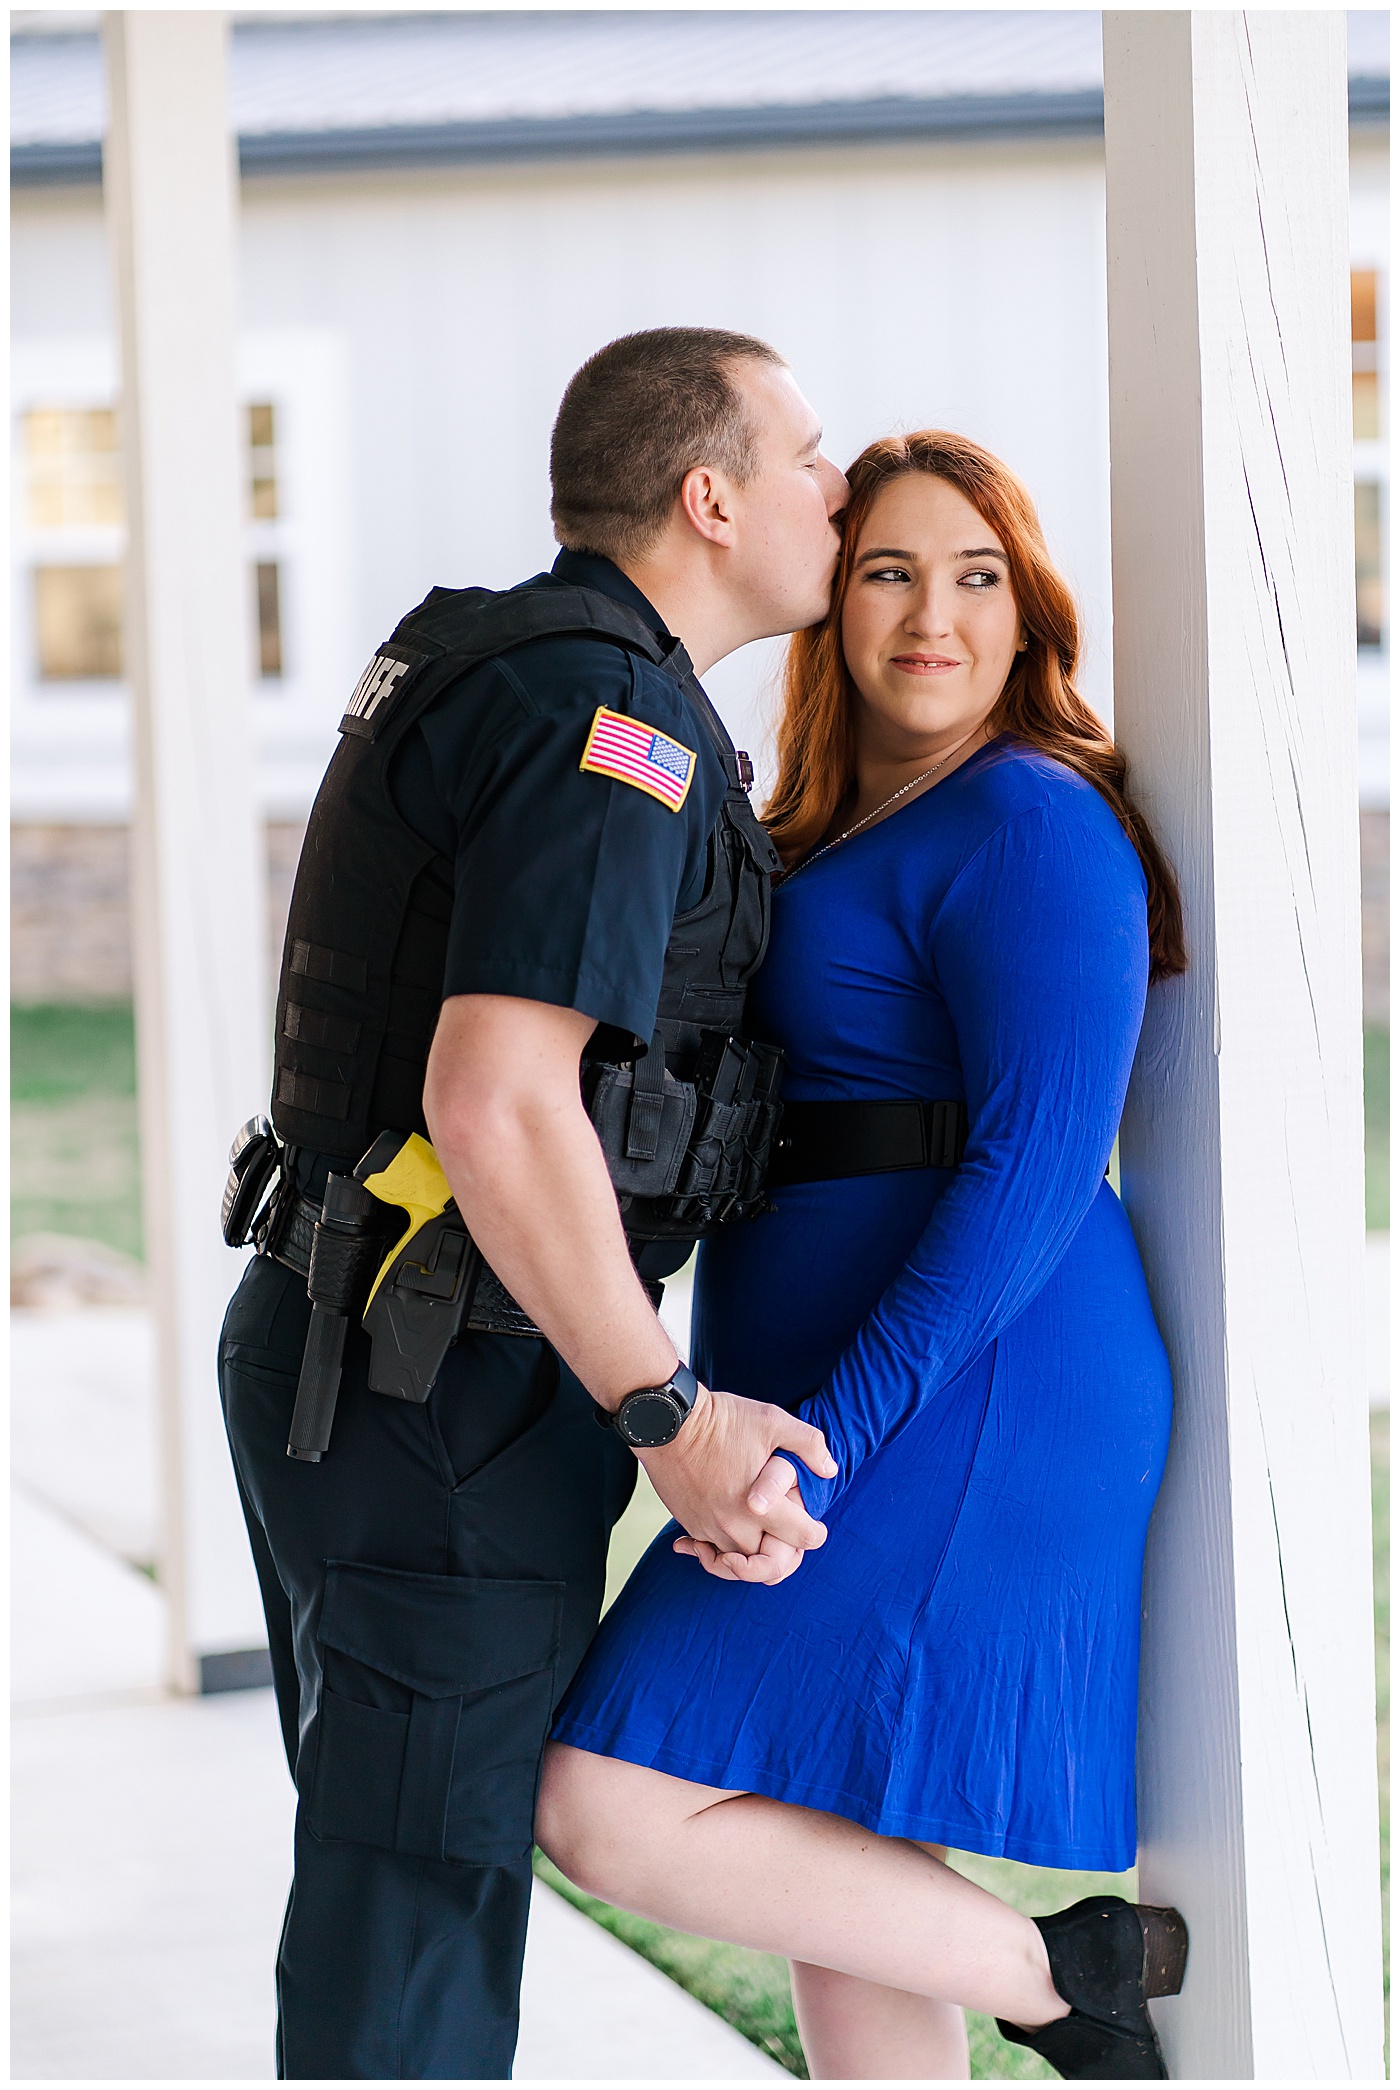 Cop and Fiance Engagement Pics